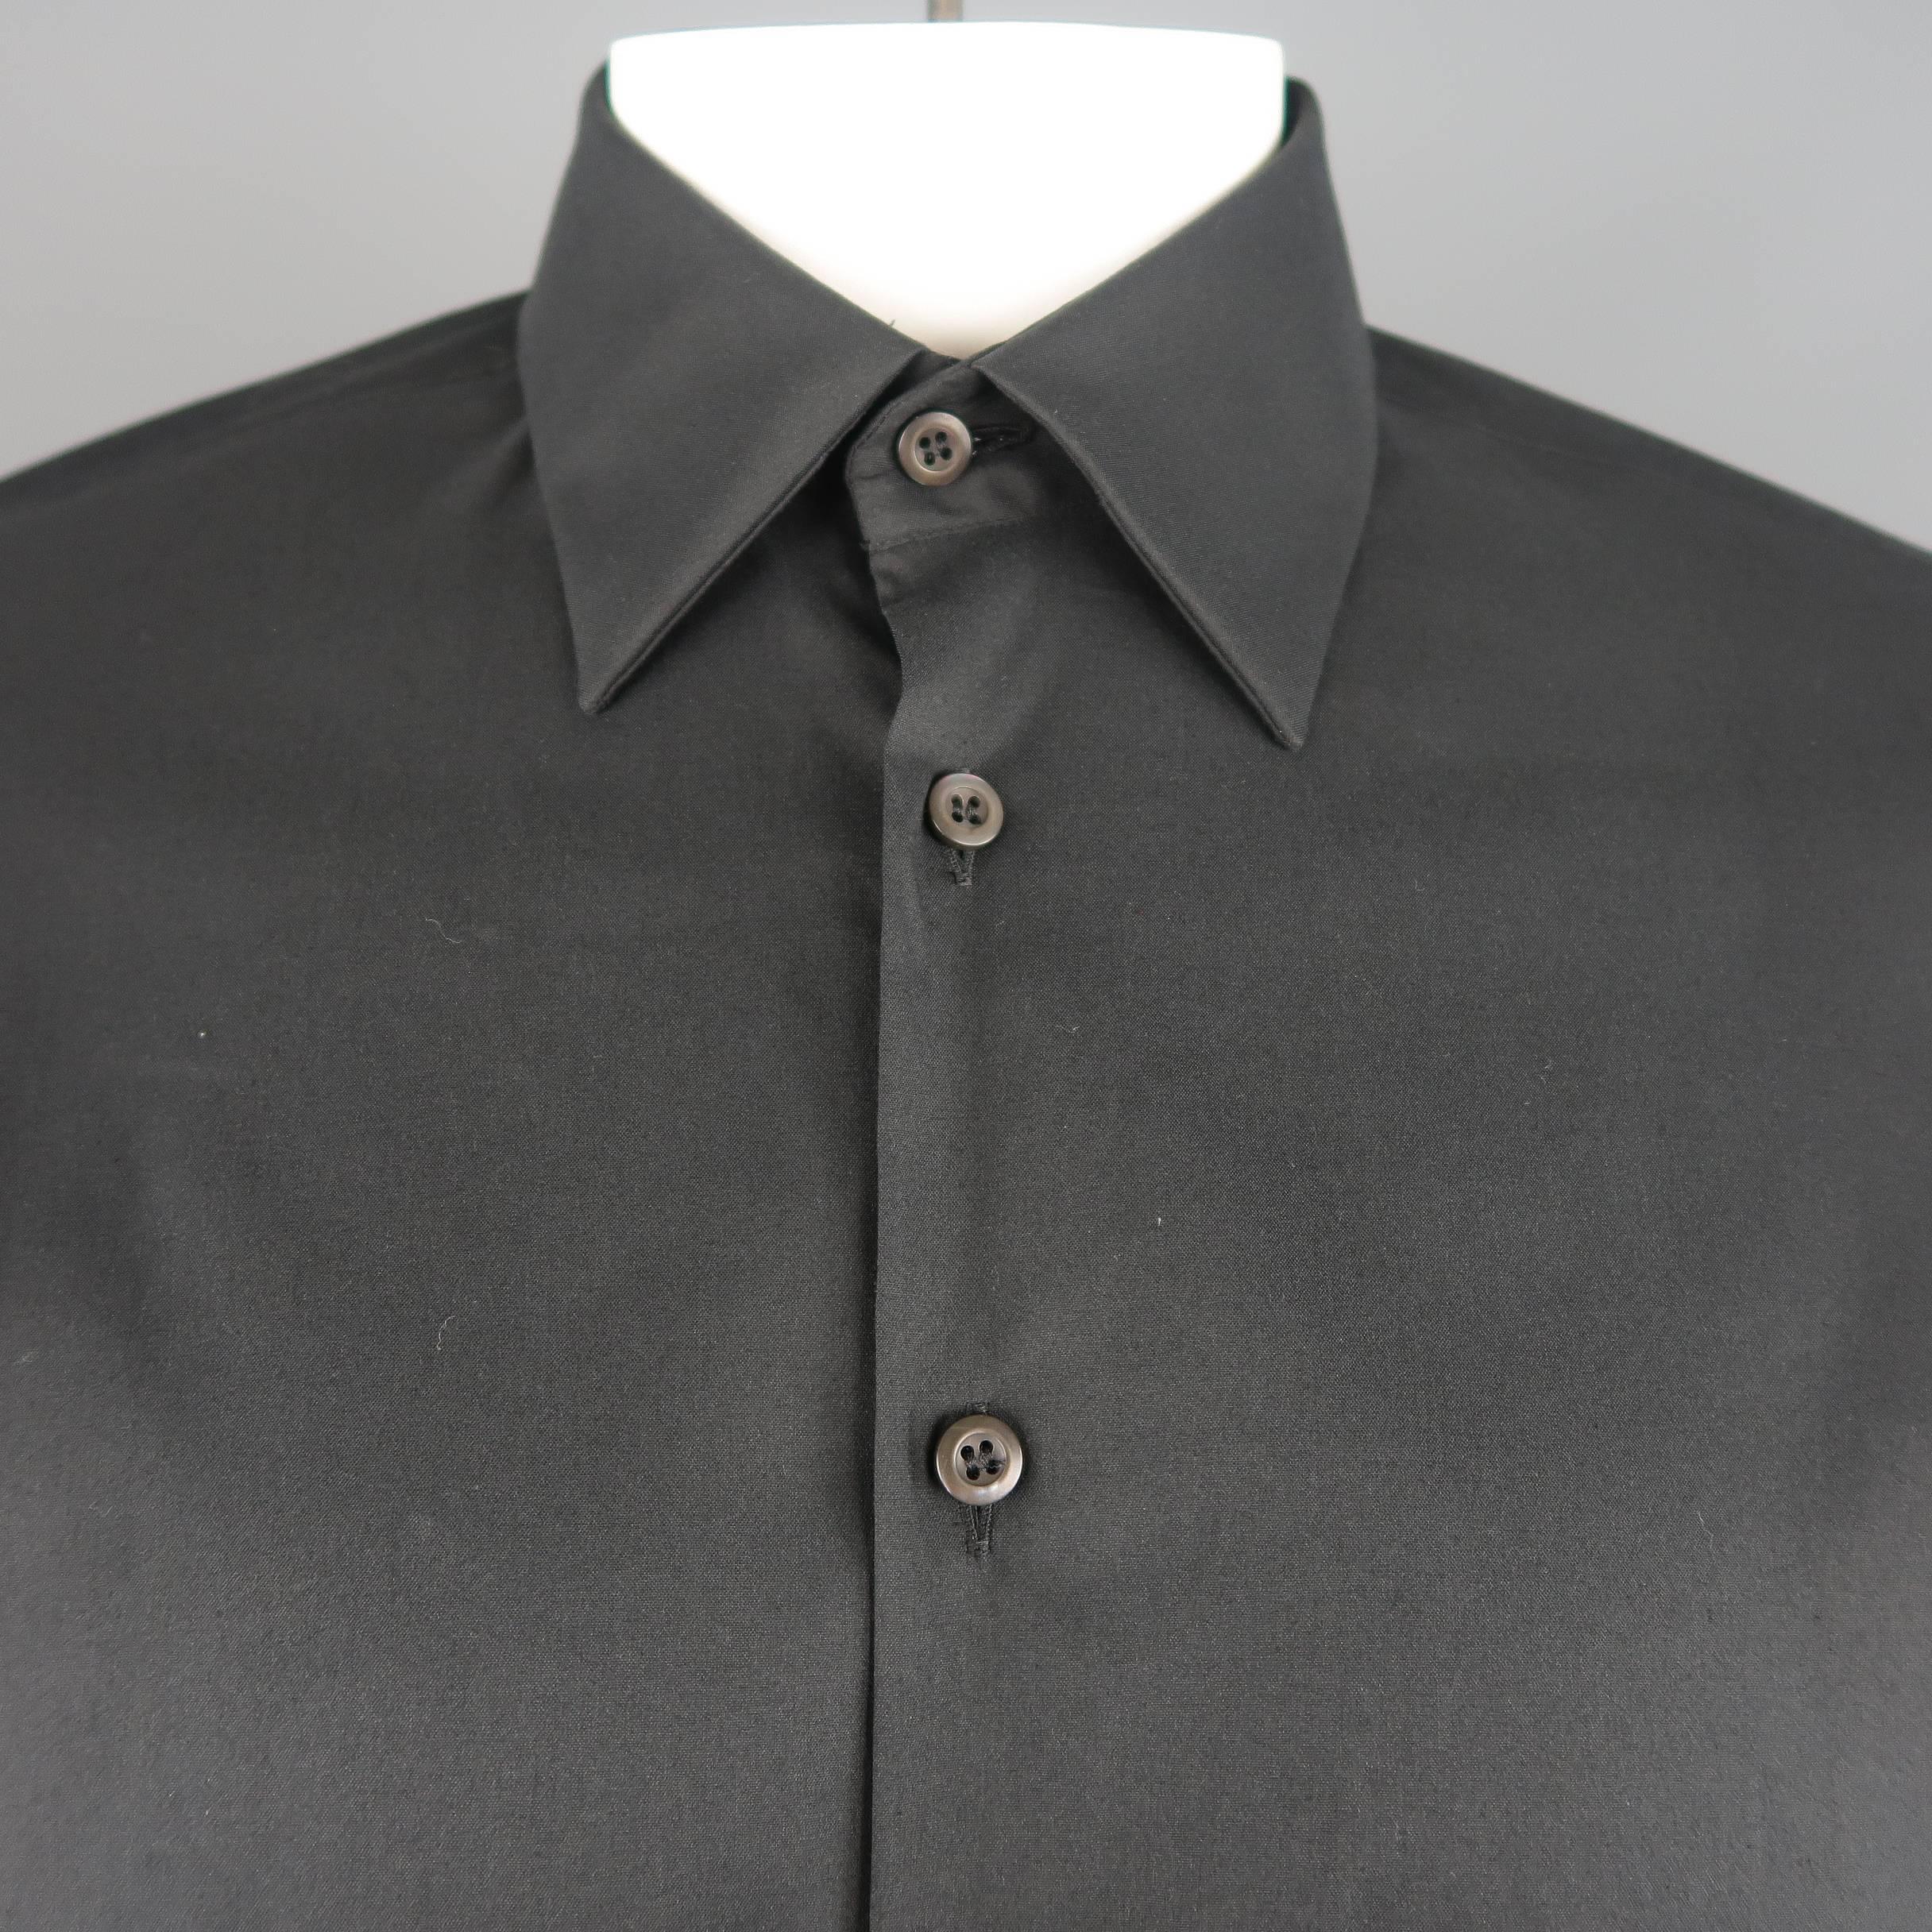 PRADA dress shirt comes in black stretch cotton with a pointed collar and slim fit. Made in Italy.
 
New with Tags.
Marked: 41 / 16
 
Measurements:
 
Shoulder: 18 in.
Chest: 44 in.
Sleeve: 27 in.
Length: 31 in.